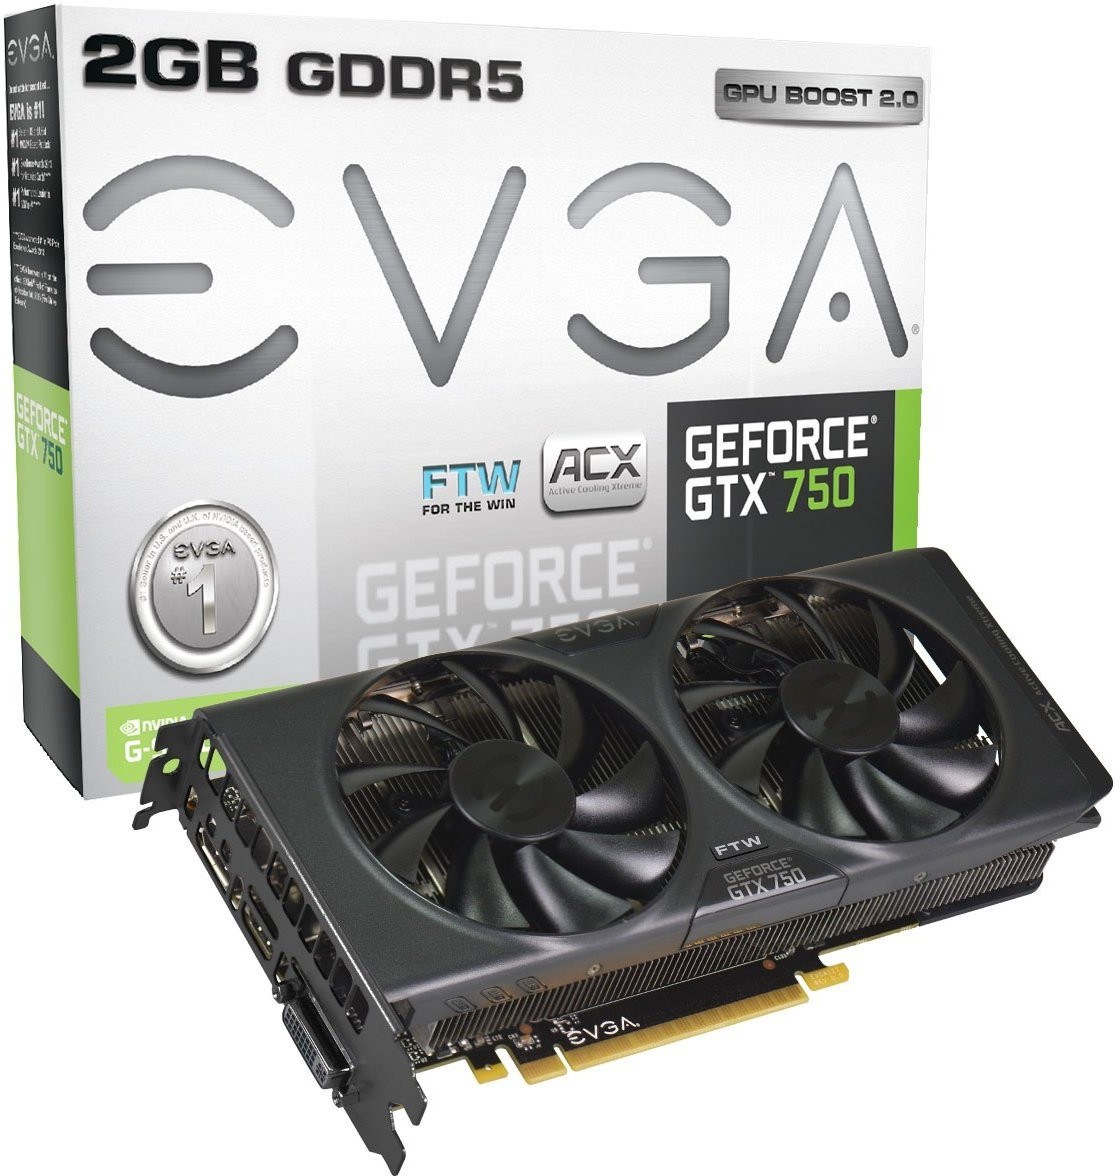 Media asset in full size related to 3dfxzone.it news item entitled as follows: EVGA introduce la card non reference GeForce GTX 750 FTW 2GB | Image Name: news20959_EVGA-GeForce-GTX-750-FTW_3.jpg